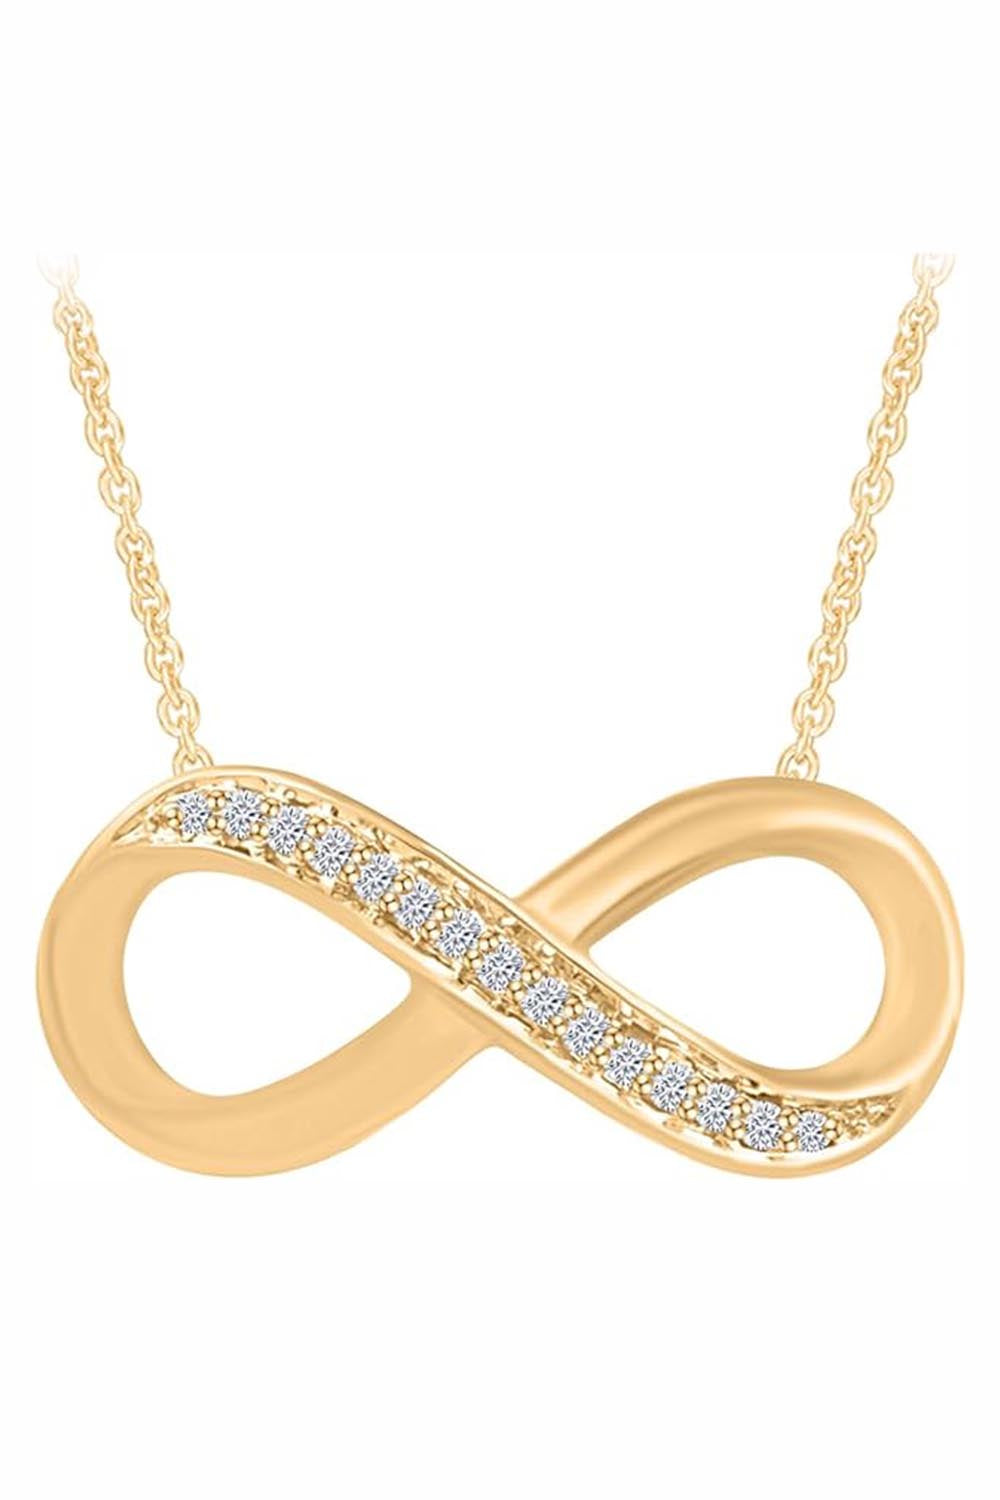 Yellow Gold Color Yaathi Infinity Necklace, Women's Pendant Necklace